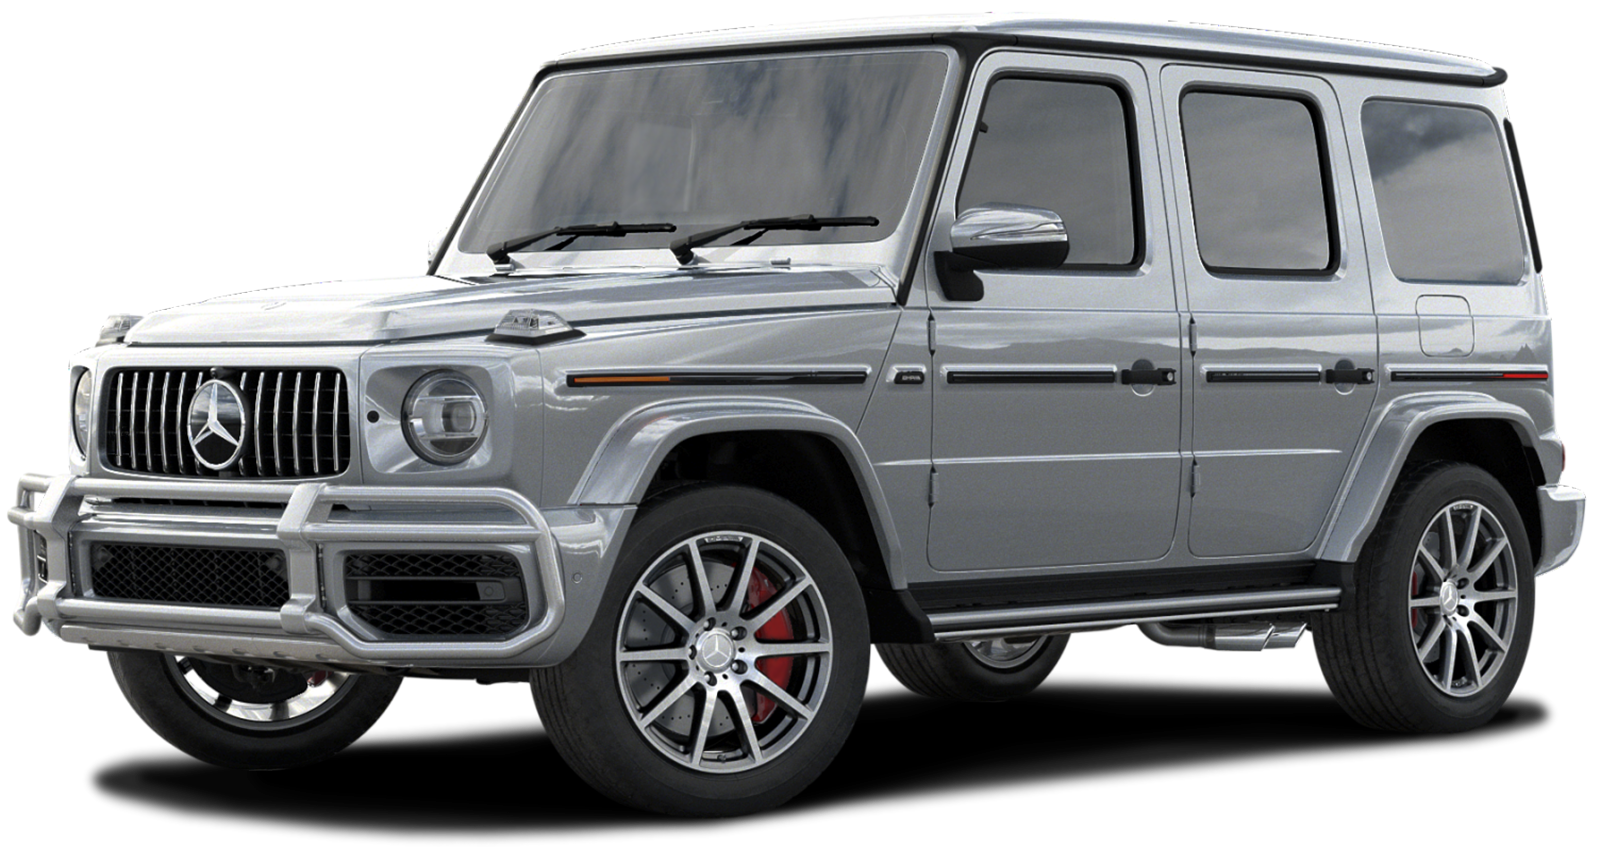 Mercedes Benz Amg G 63 Incentives Specials Offers In Winston Salem Nc